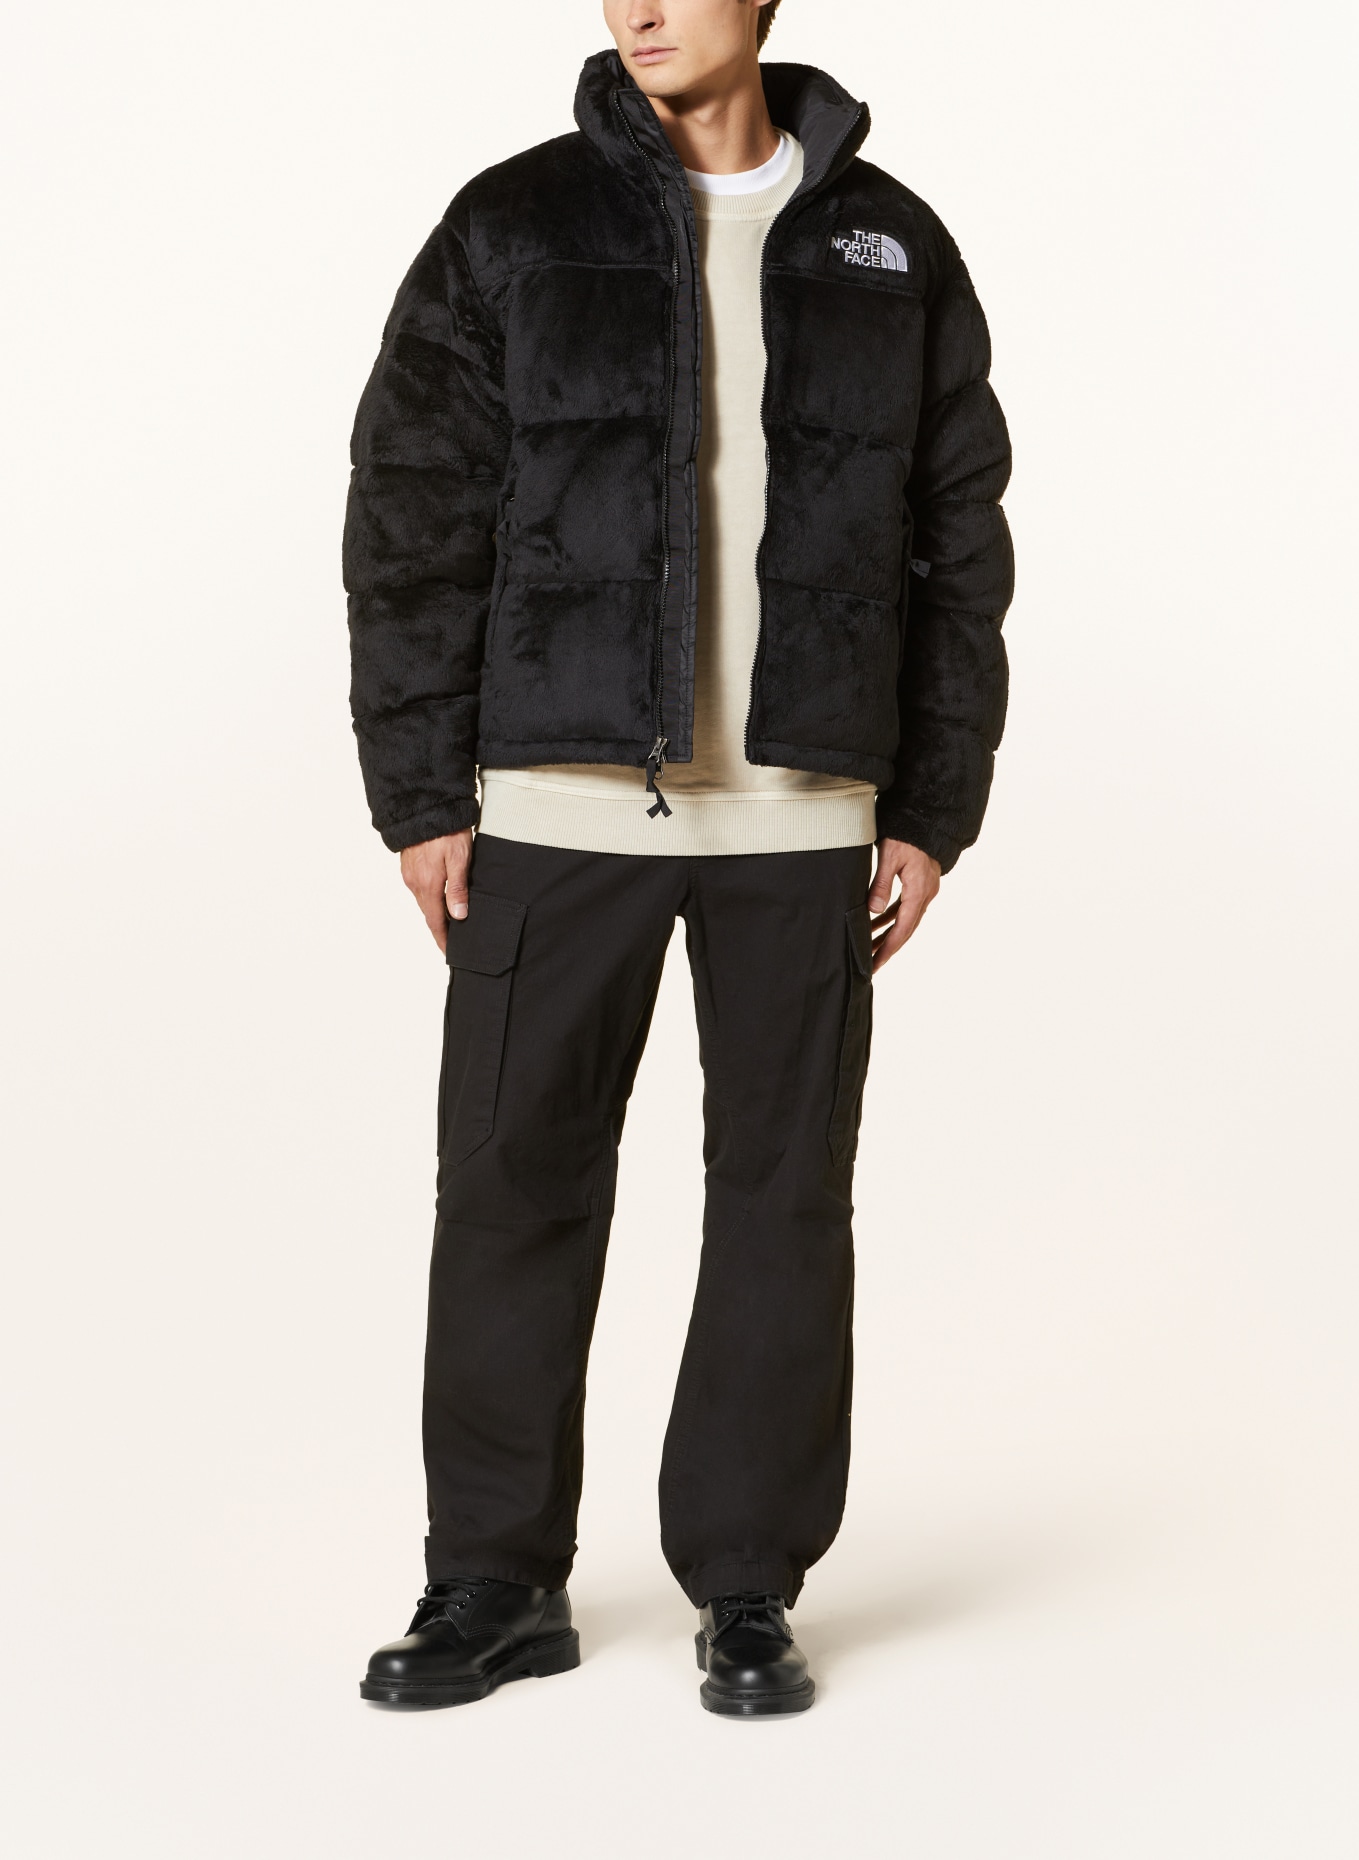 THE NORTH FACE Down jacket VERSA in black